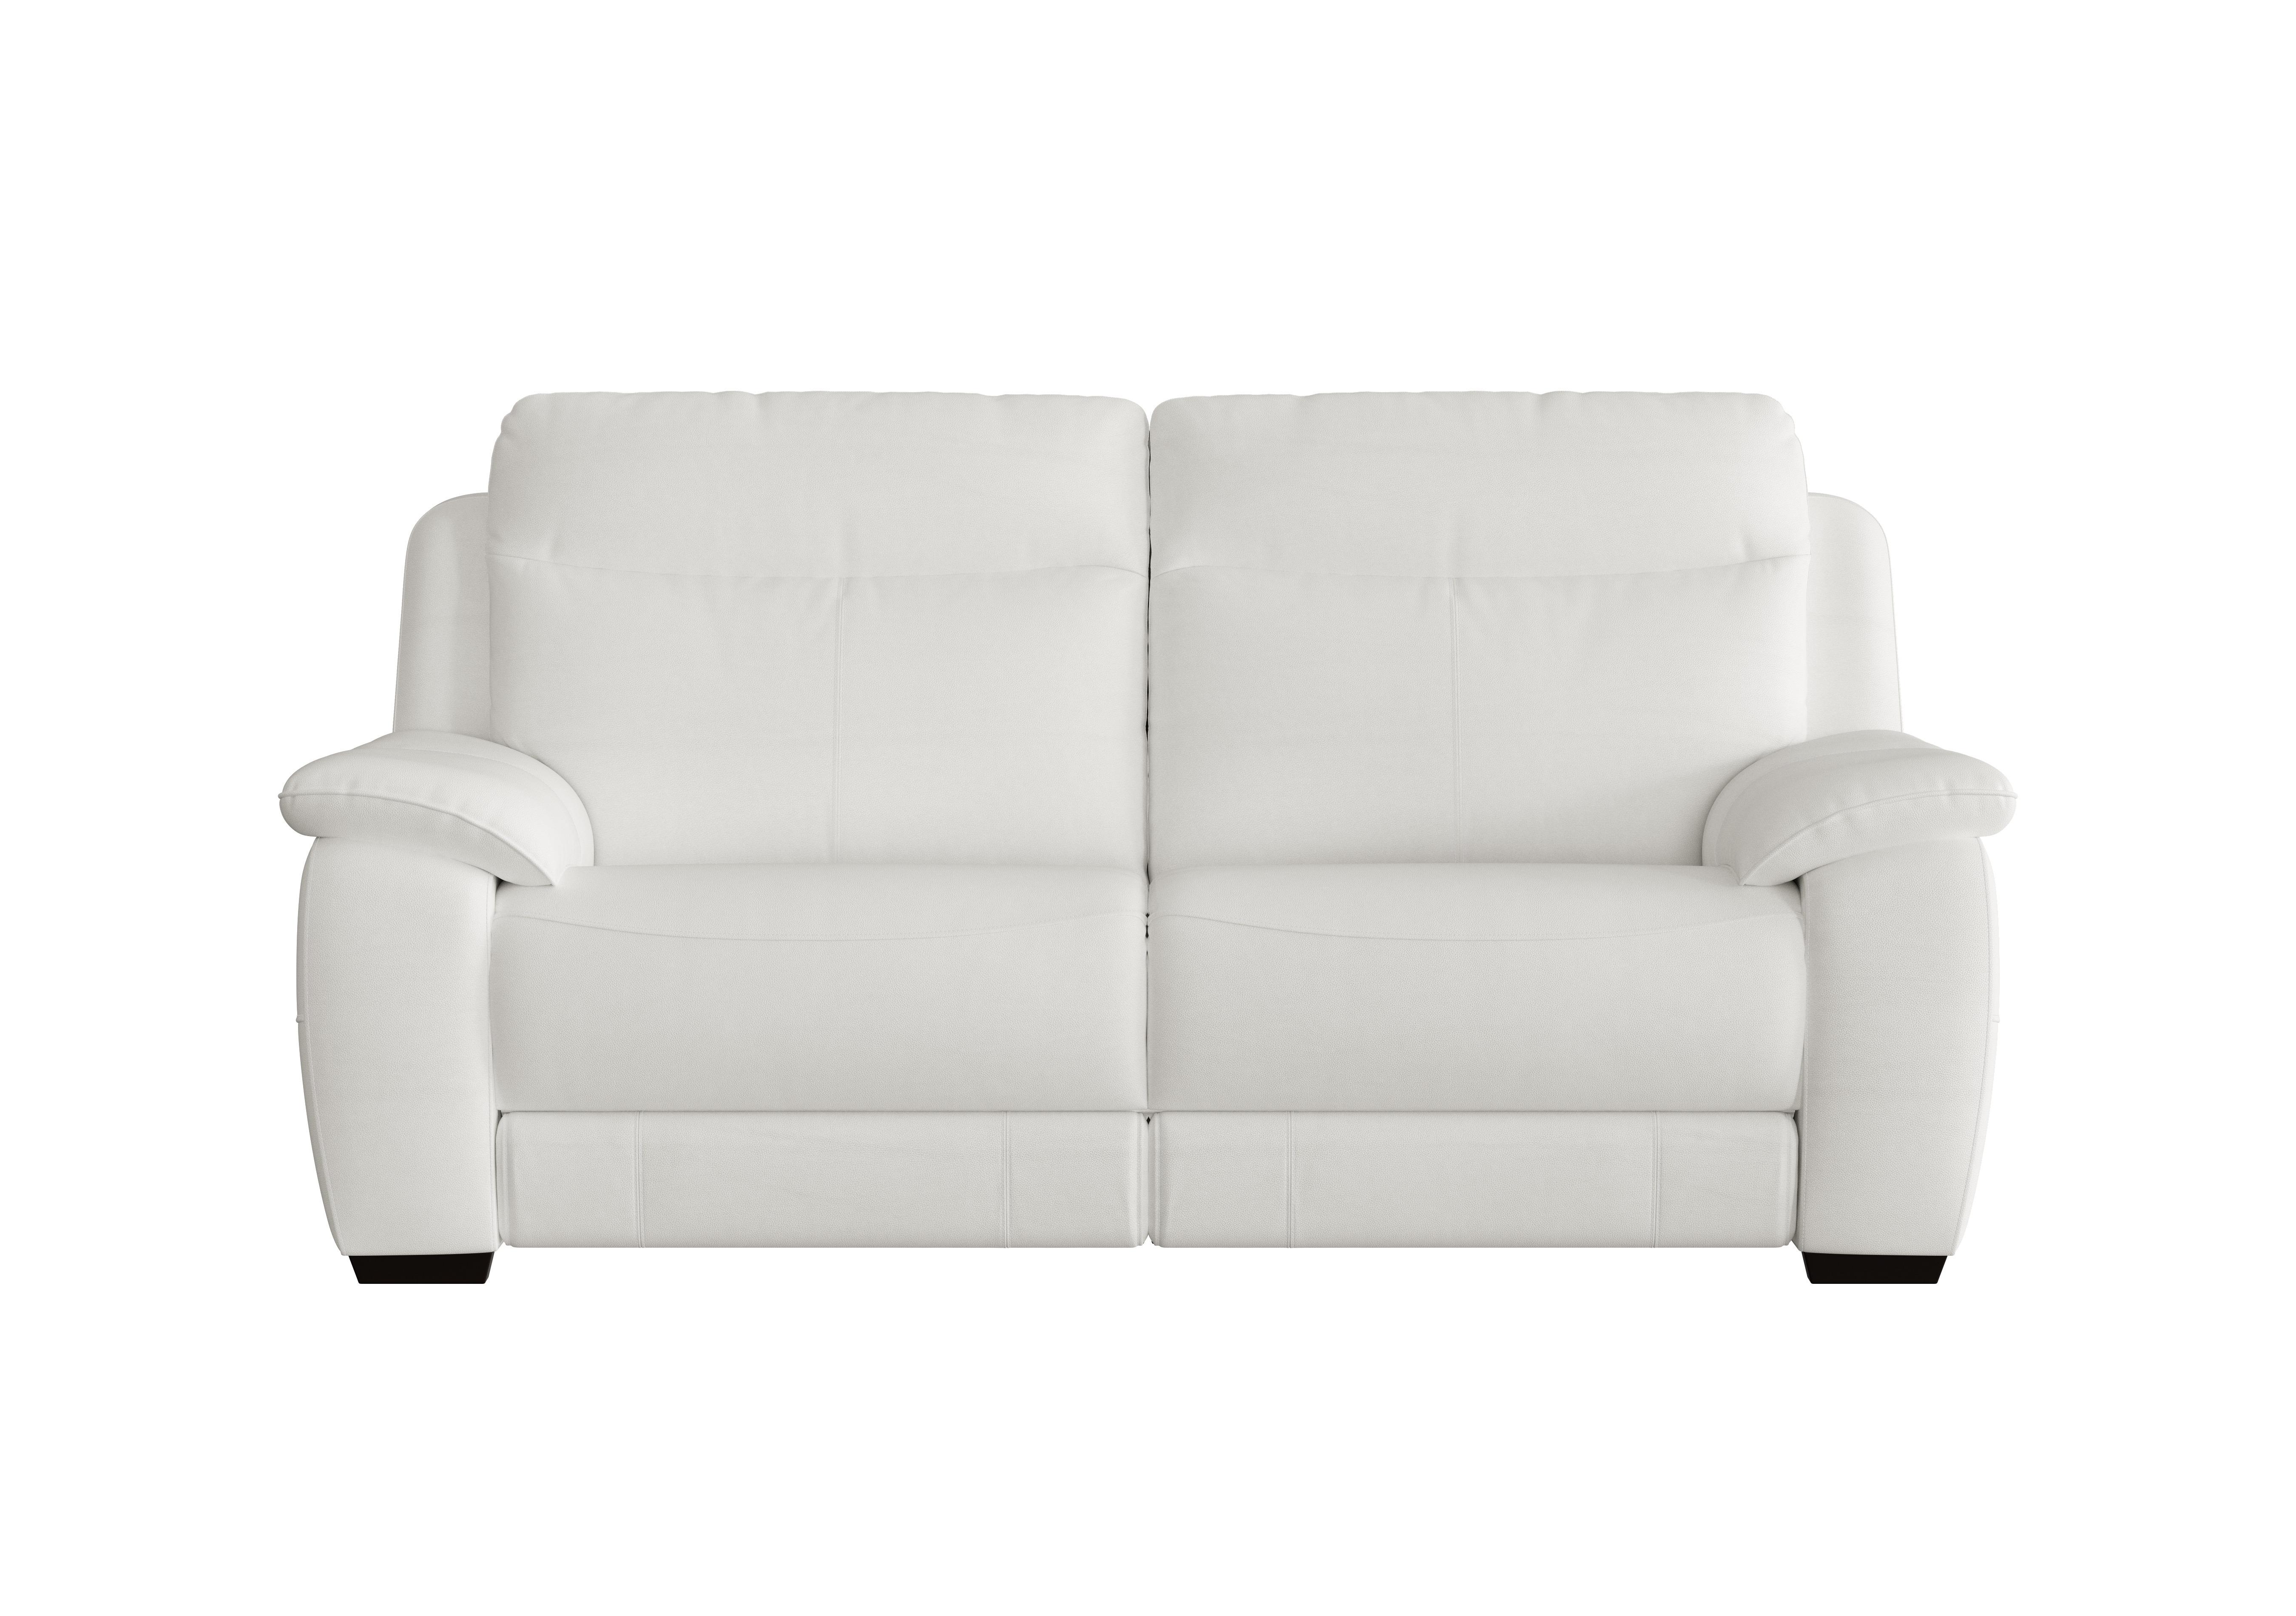 Starlight Express 3 Seater Leather Sofa in Bv-744d Star White on Furniture Village